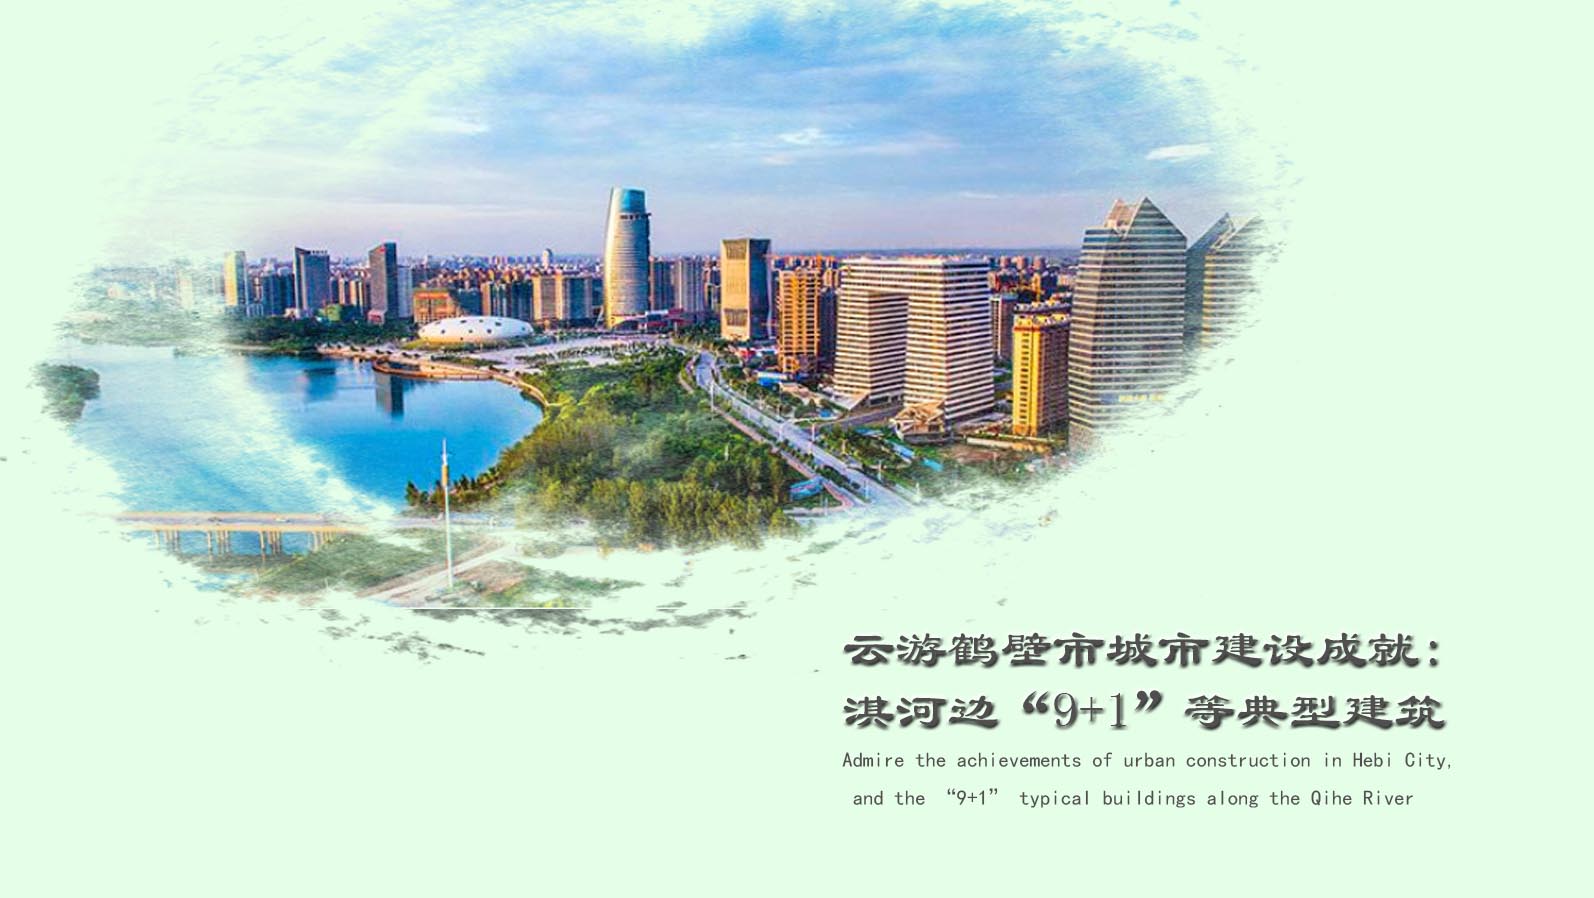 Admire the achievements of urban construction in Hebi City, and the “9+1” typical buildings along the Qihe River (i.e. 9 buildings and 1 convention and exhibition center)